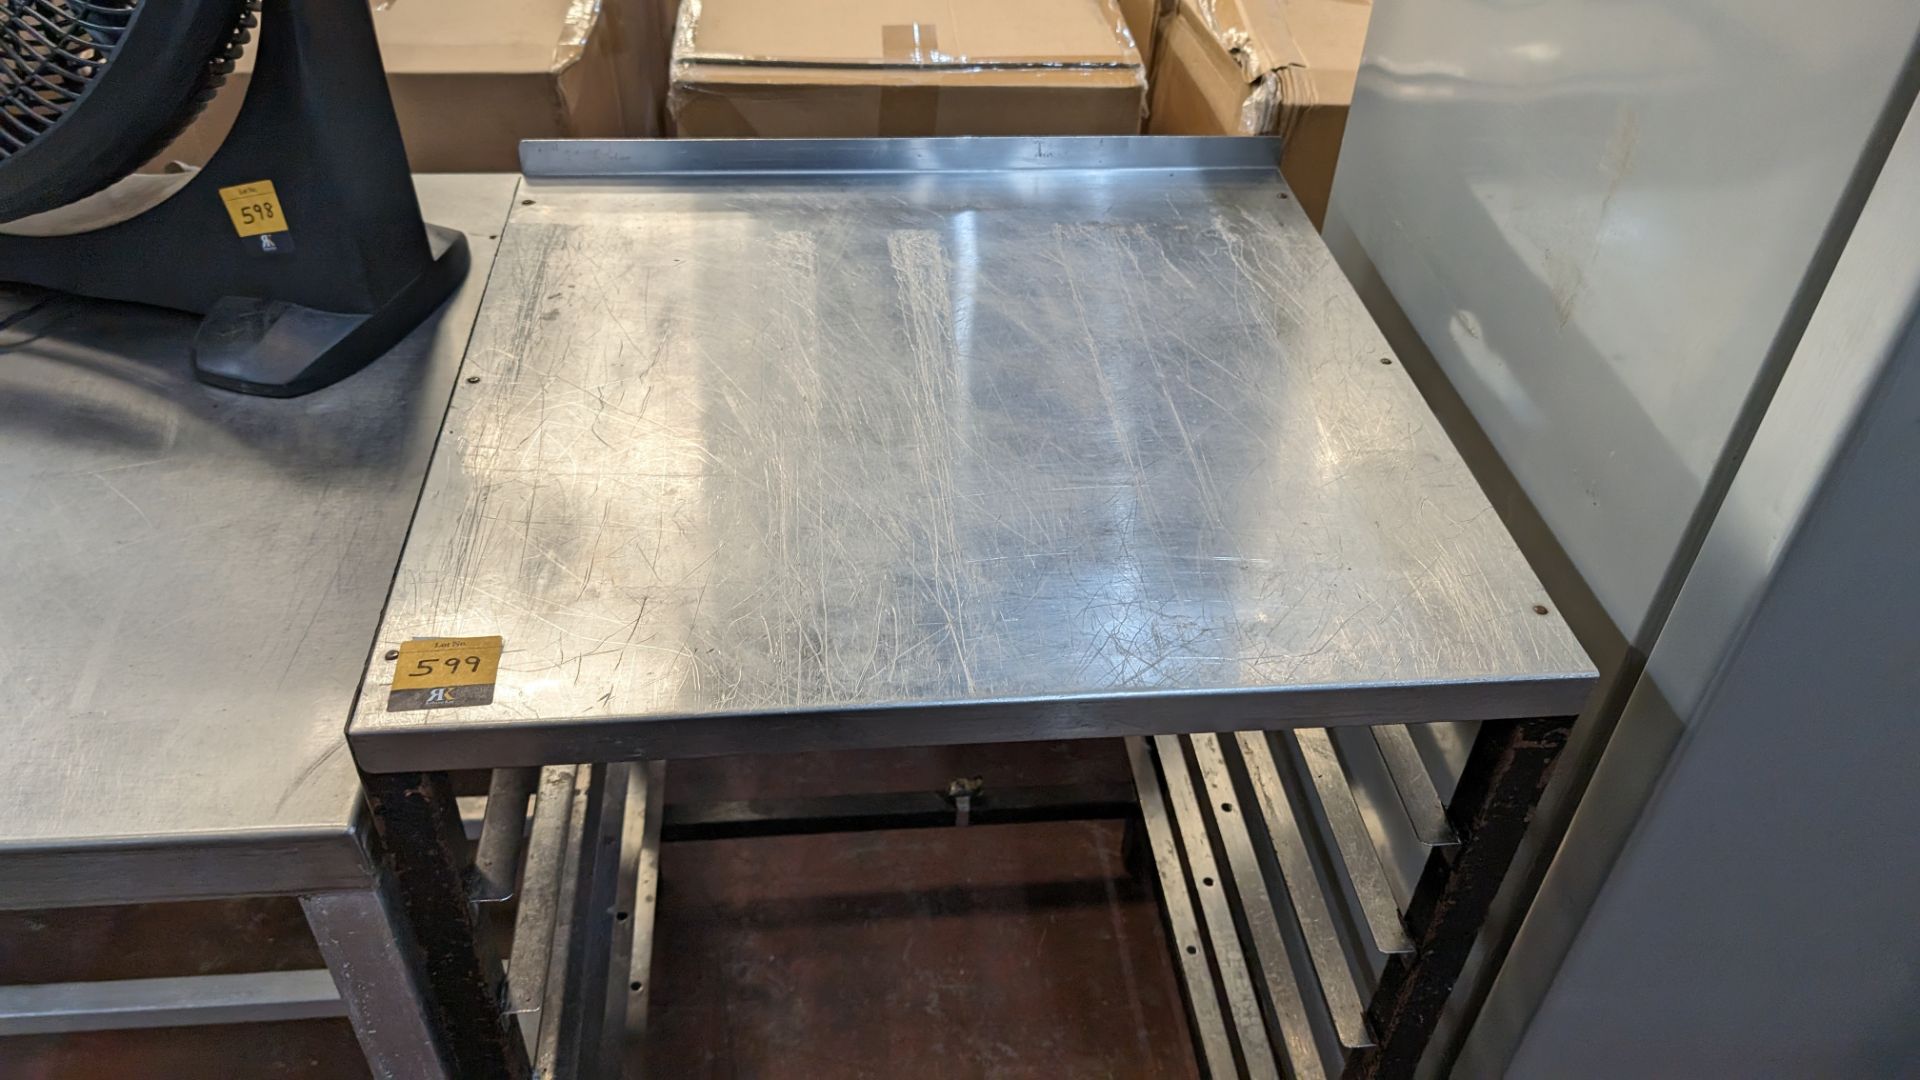 Stainless steel table with capacity for holding trays below, assumed to be for use for commercial di - Bild 3 aus 4